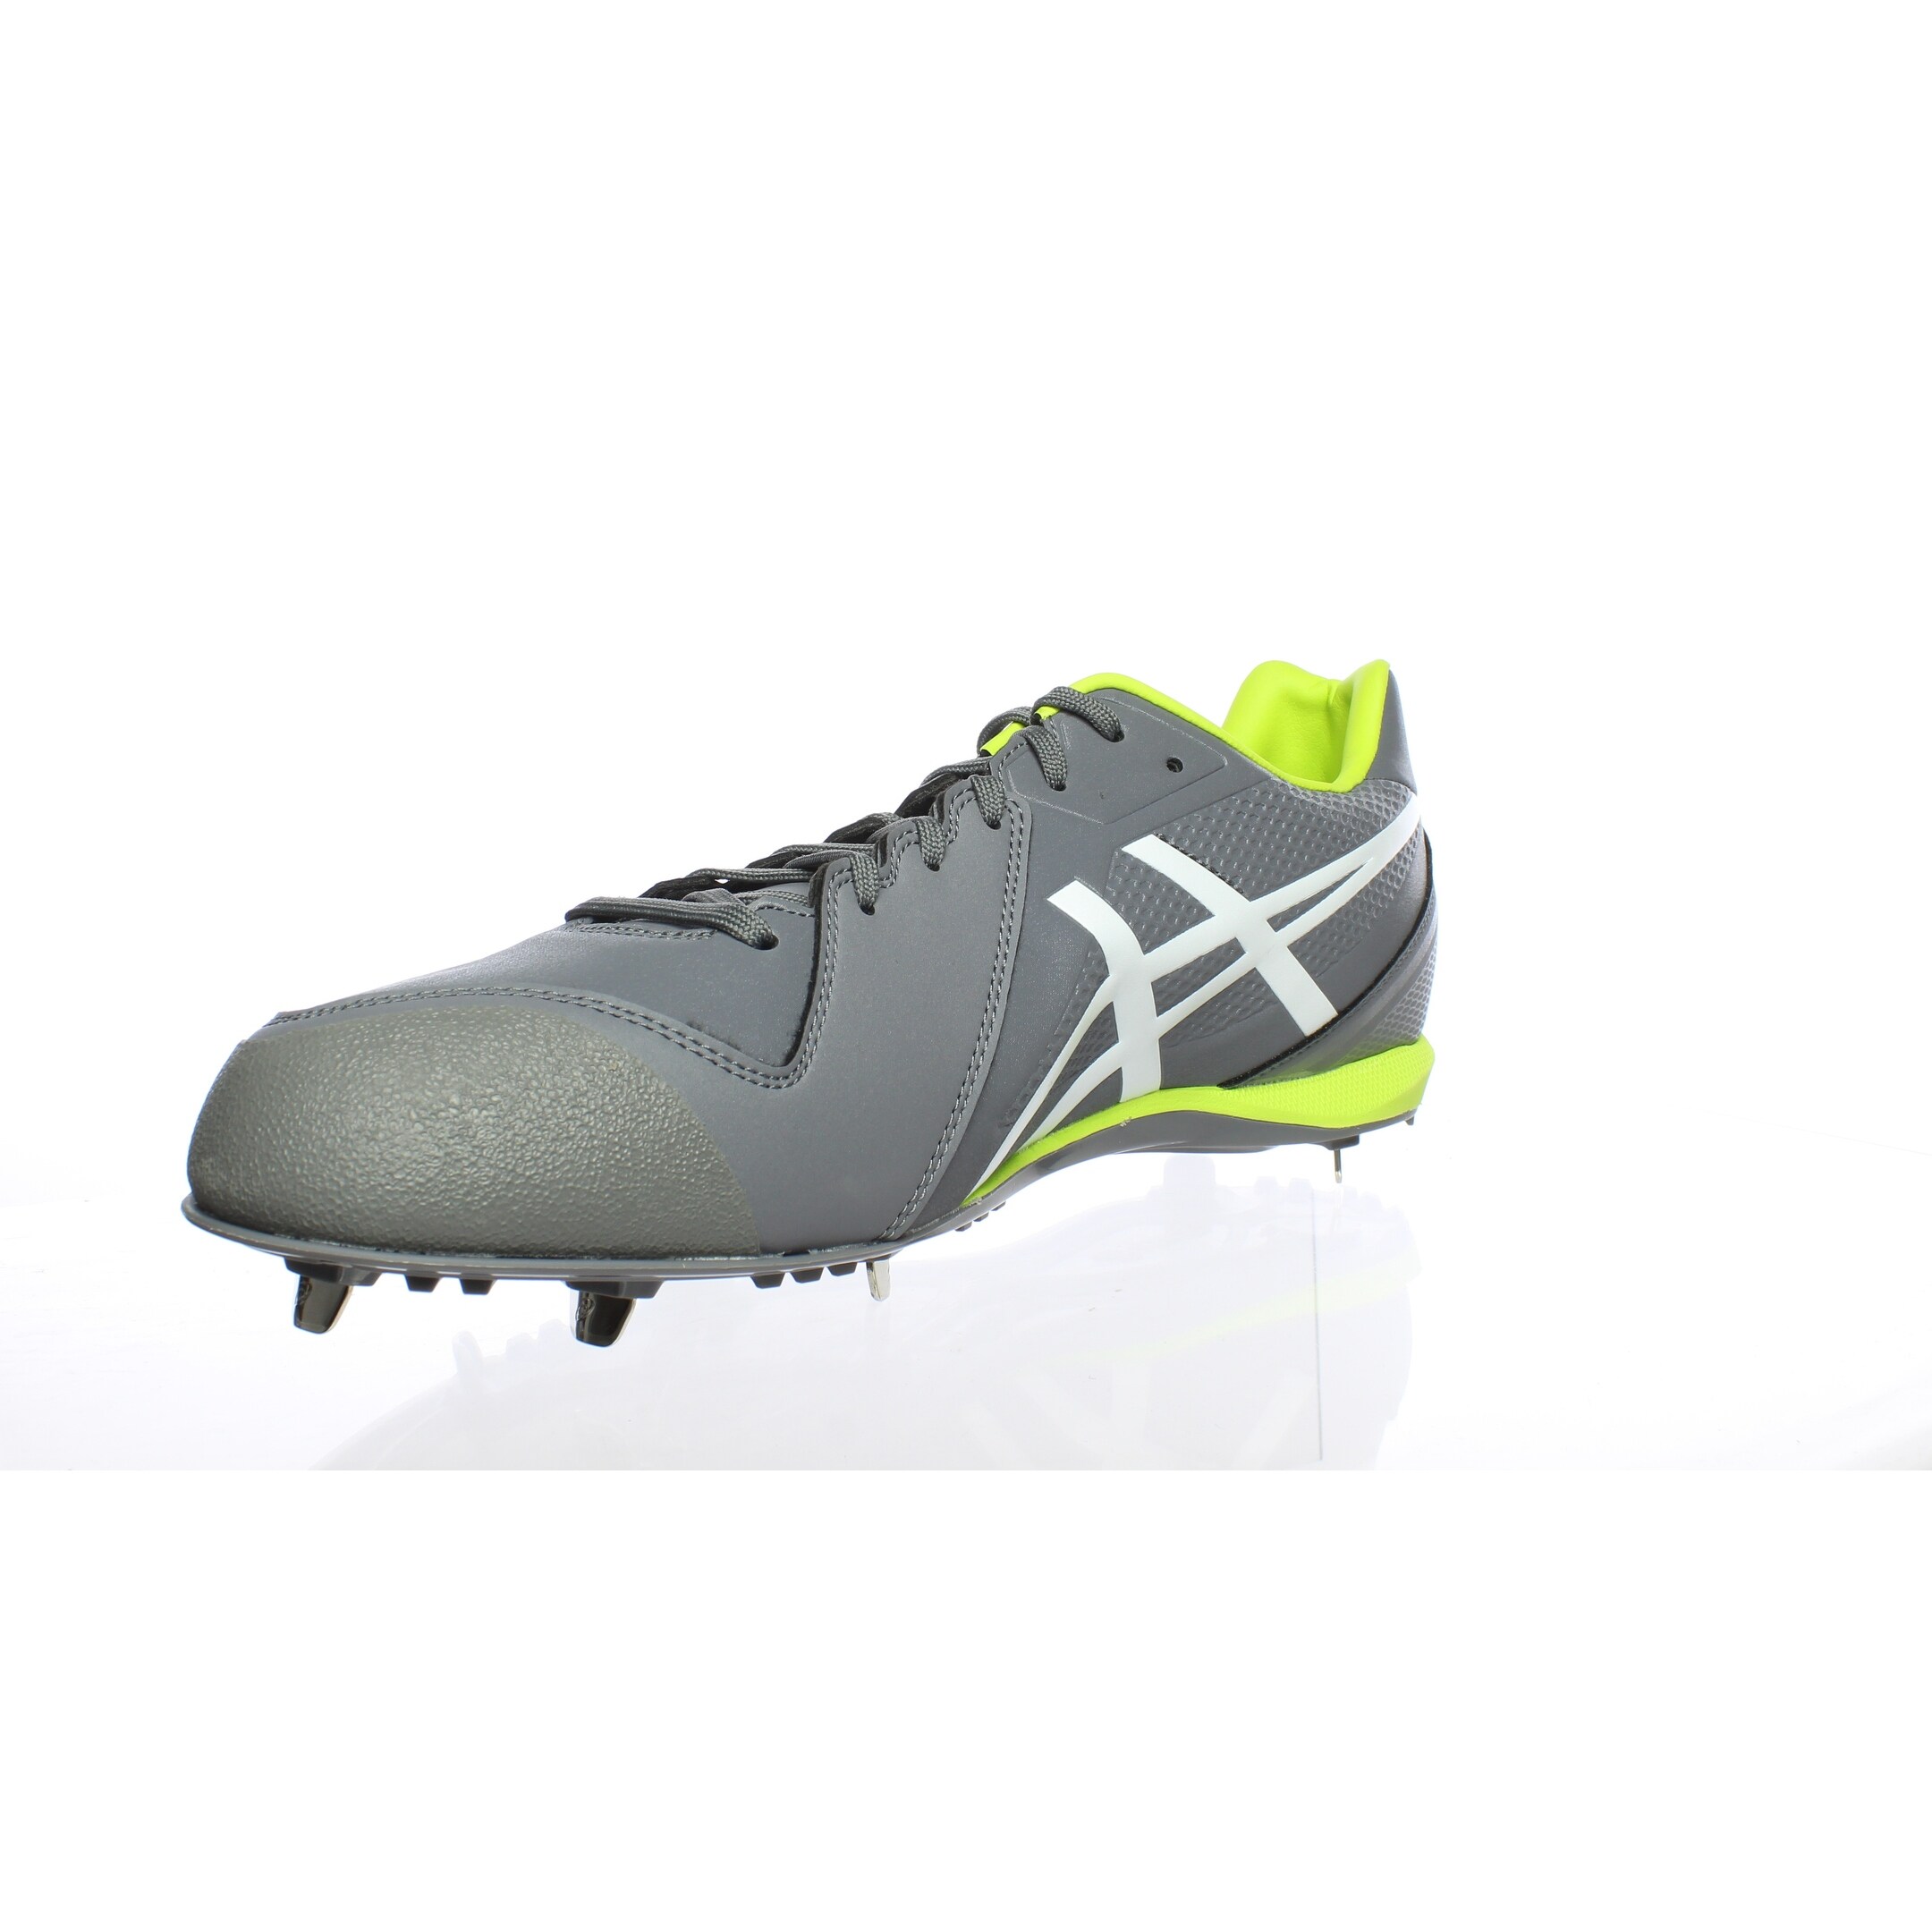 asics rugby boots size 11